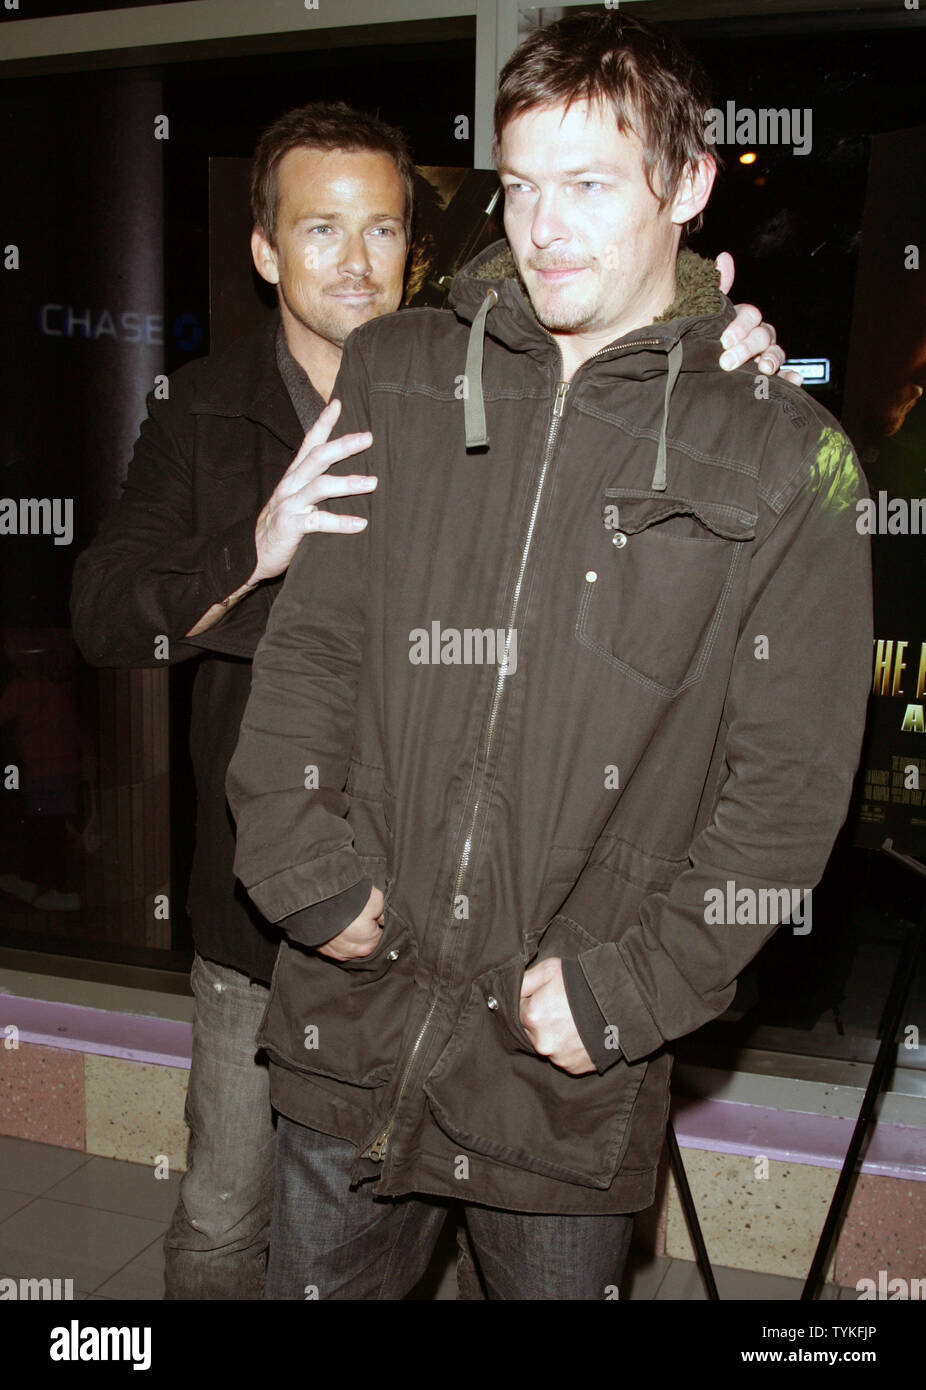 Sean Patrick Flanery and Norman Reedus arrive for the premiere of 'The Boondock Saints II: All Saints Day' at the Regal Union Square Theater in New York on October 20, 2009.       UPI /Laura Cavanaugh Stock Photo